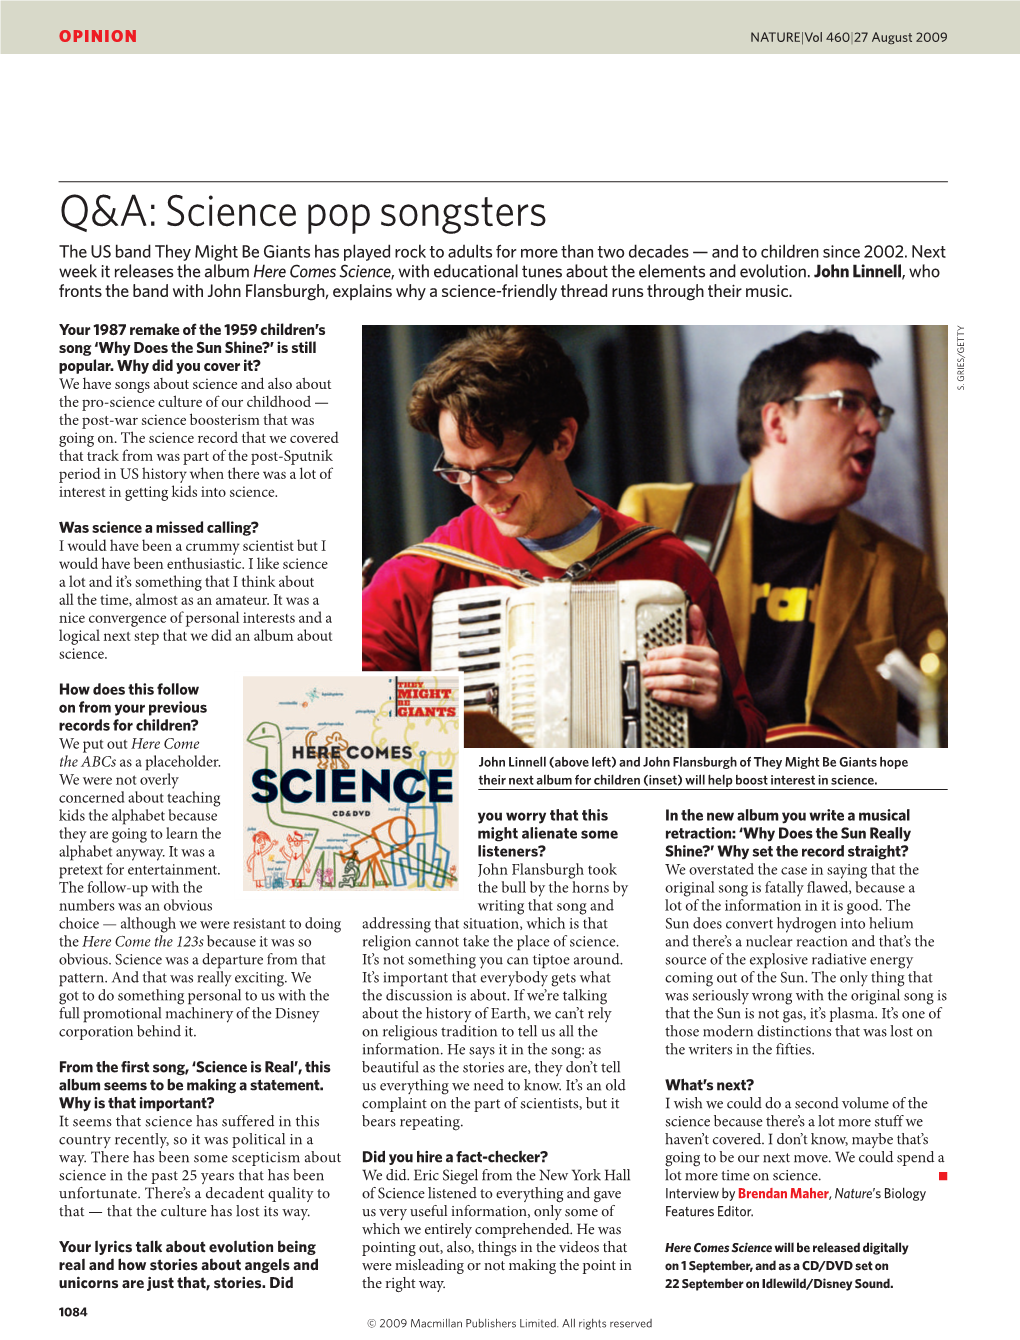 Q&A: Science Pop Songsters